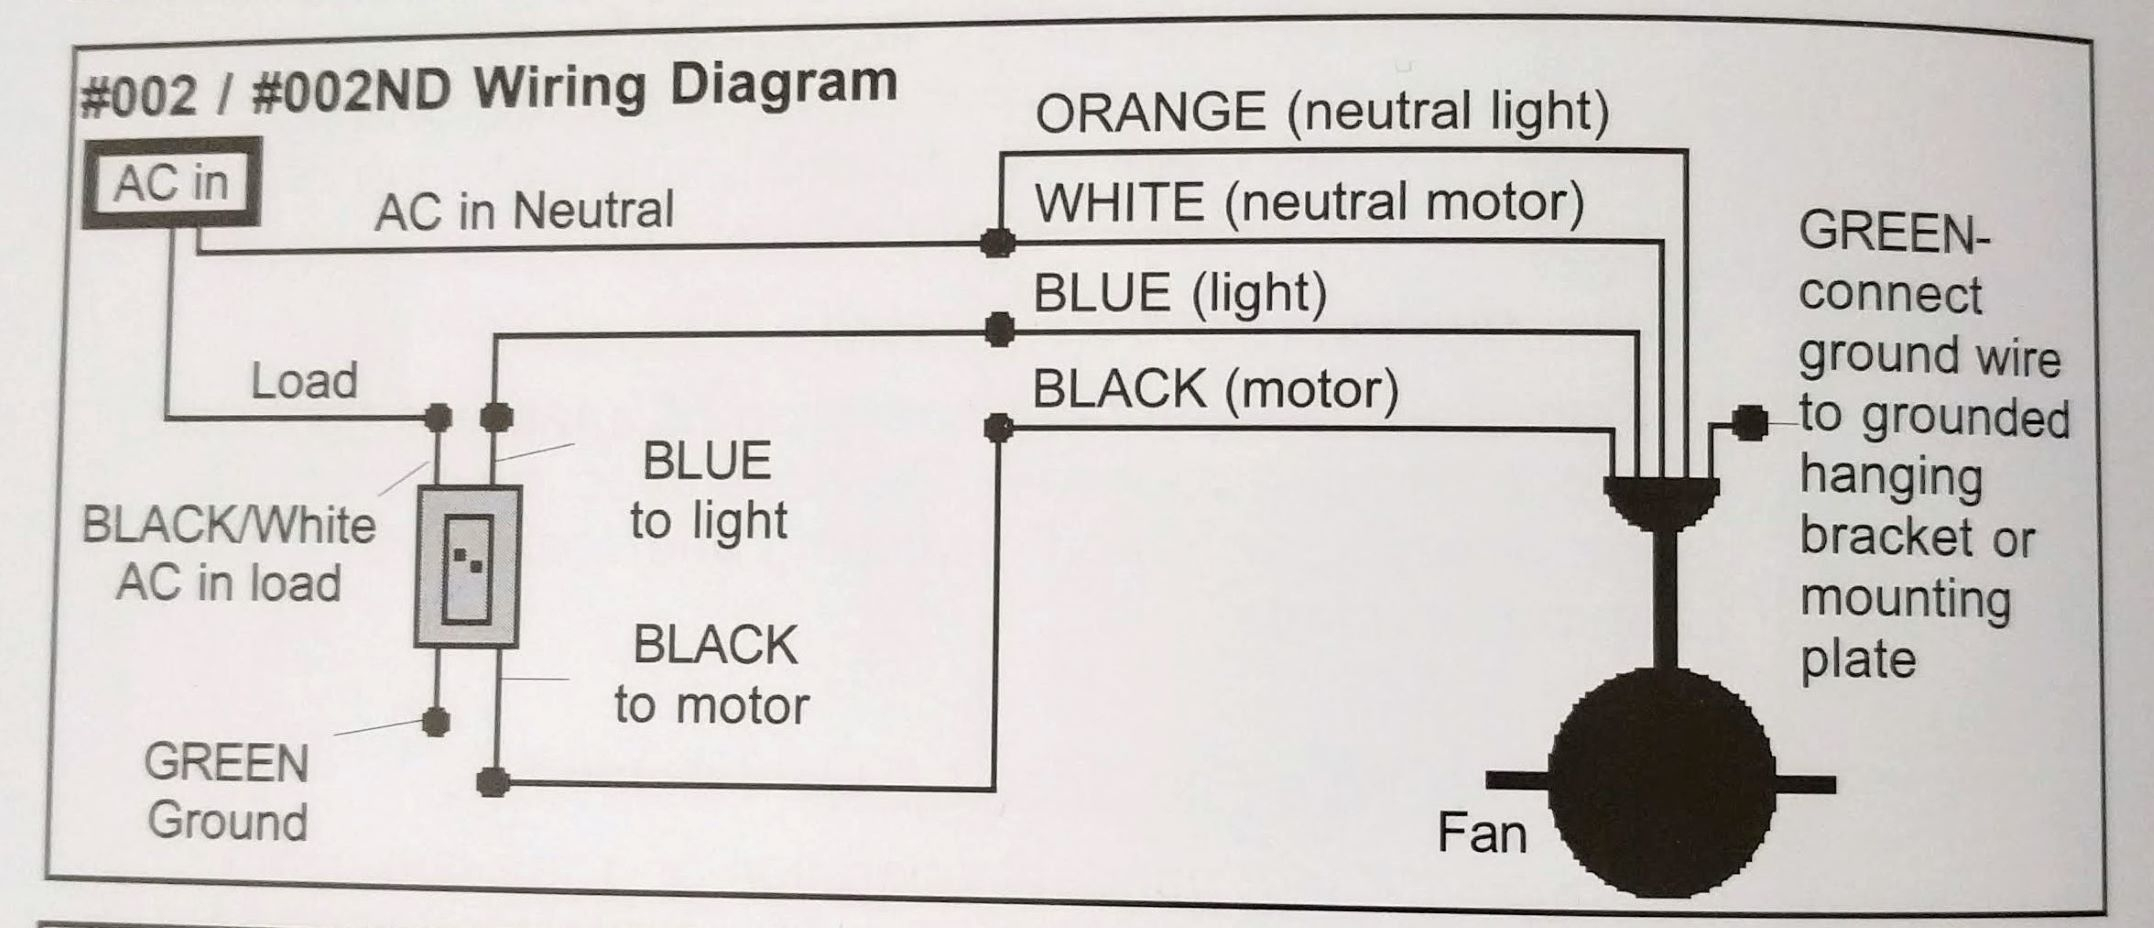 Wiring A Ceiling Fan With Black, White, Red, Green In Ceiling Box - Ceiling Fan Wall Switch Wiring Diagram